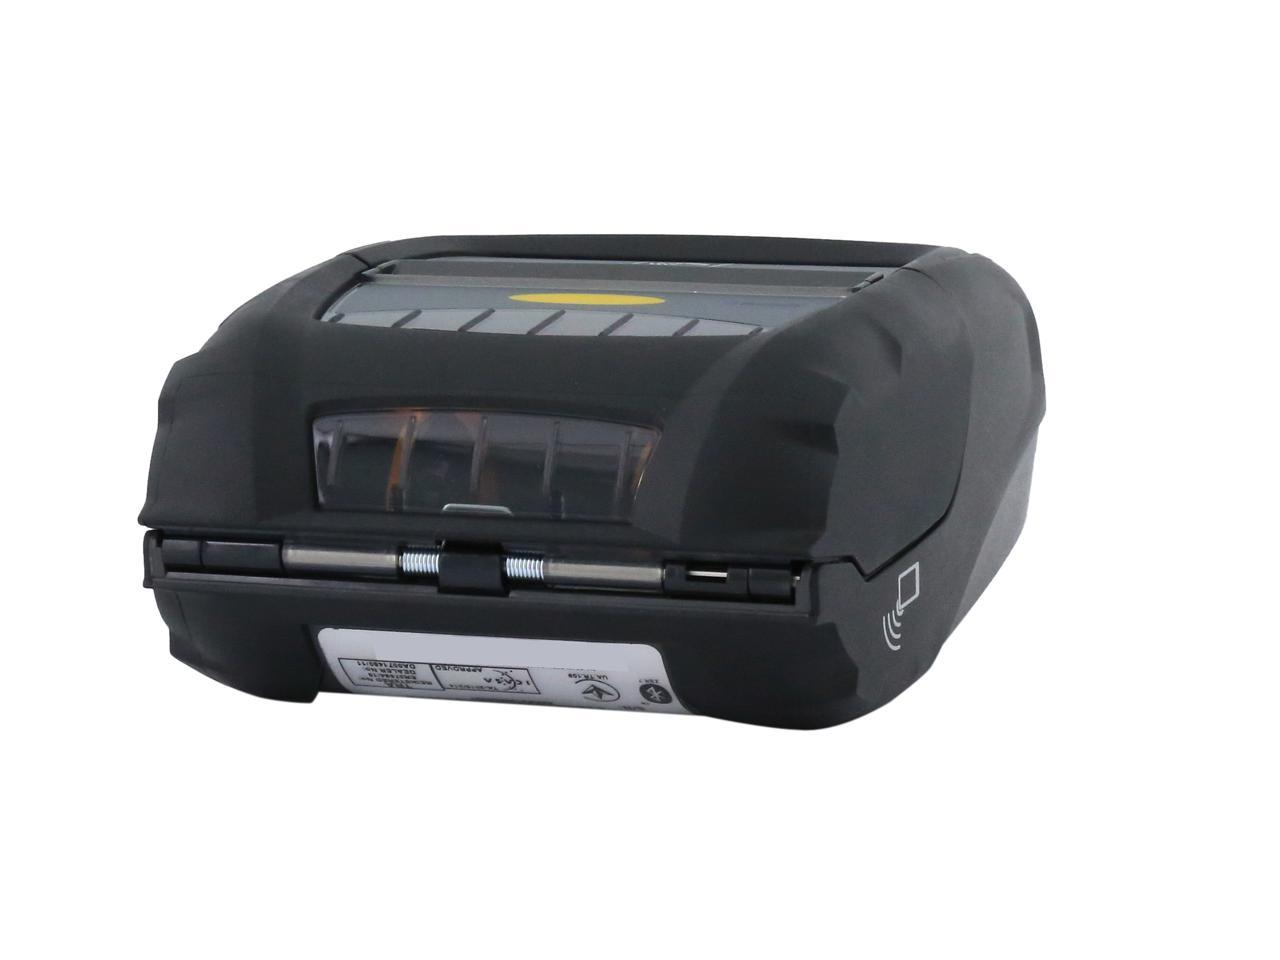 Zebra Zq510 3 Mobile Direct Thermal Receipt And Label Printer 203 Dpi Bluetooth 40 Linered 6917